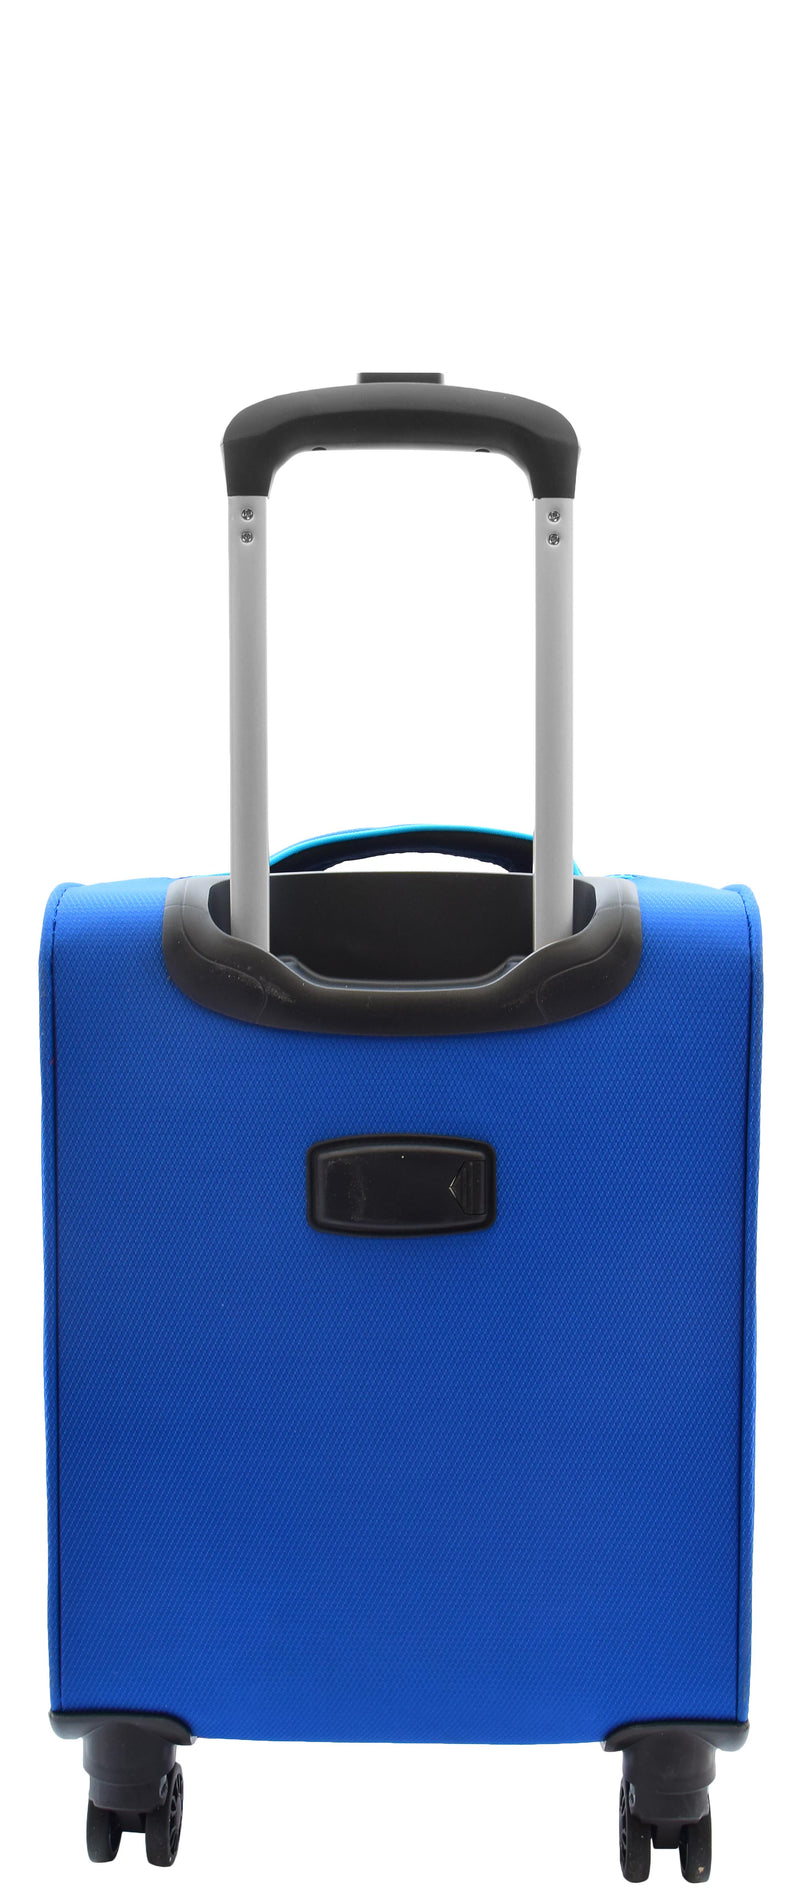 Budget Airline Approved Under Seat Cabin Size Suitcase Four Wheel Luggage HL22 Blue